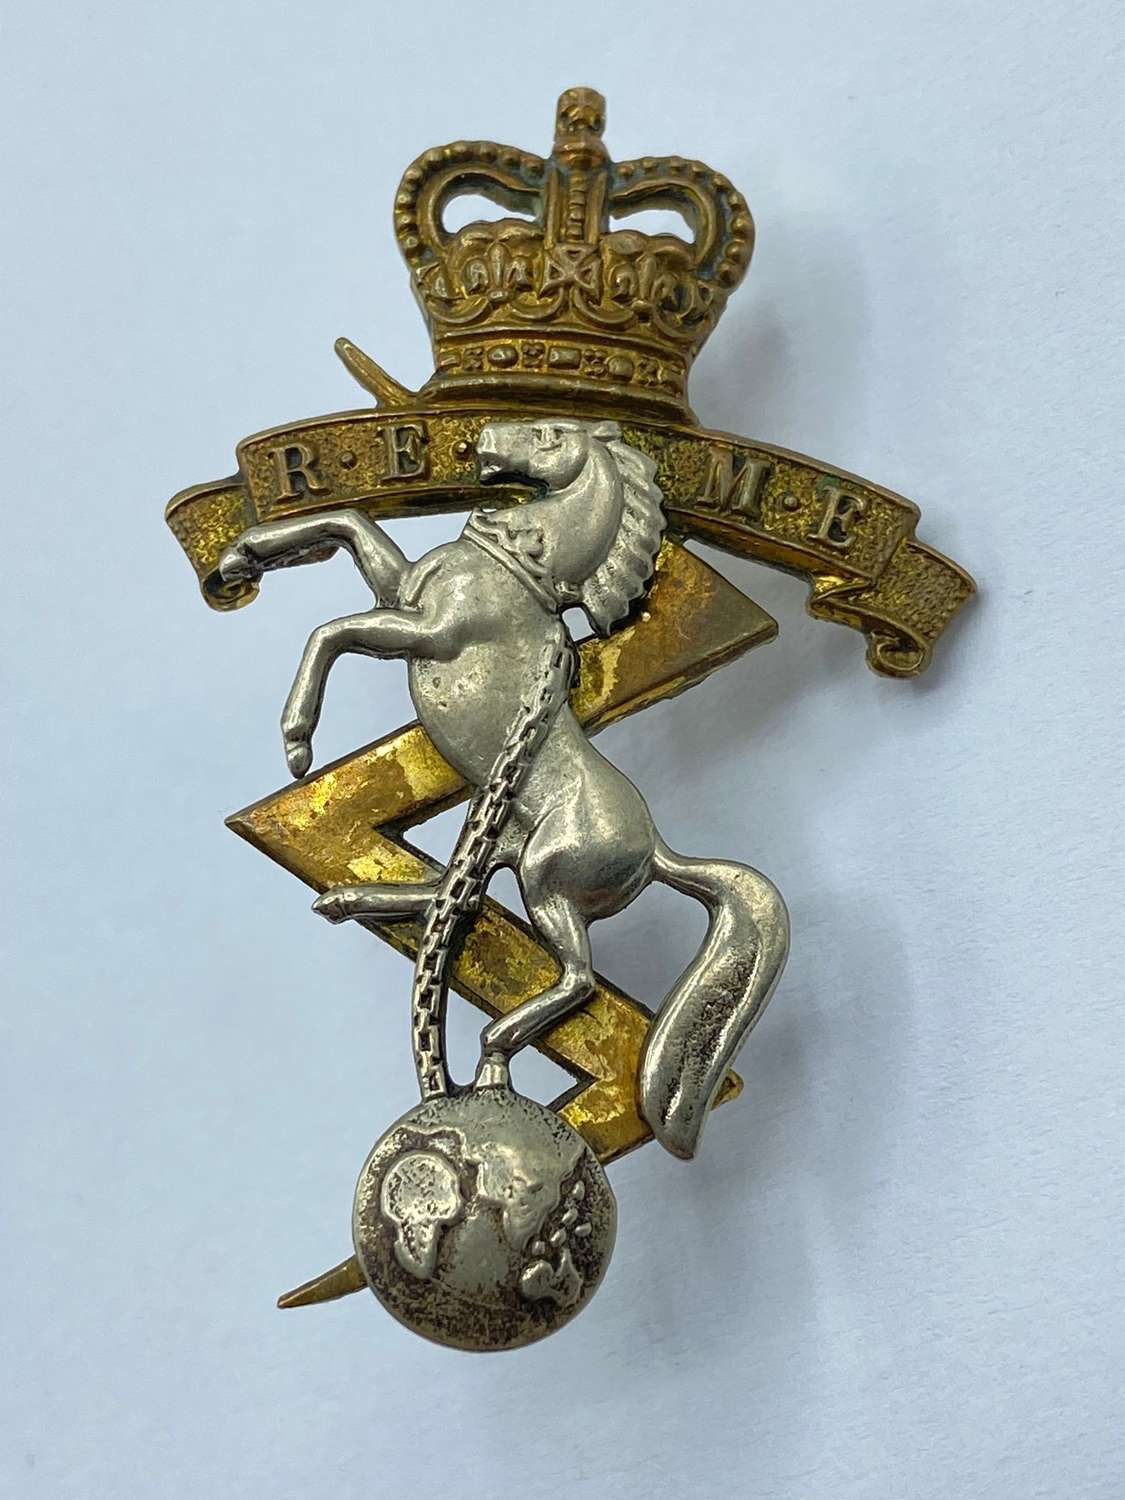 Post WW2 Royal Electrical Mechanical Engineers Cap Badge By Gaunt